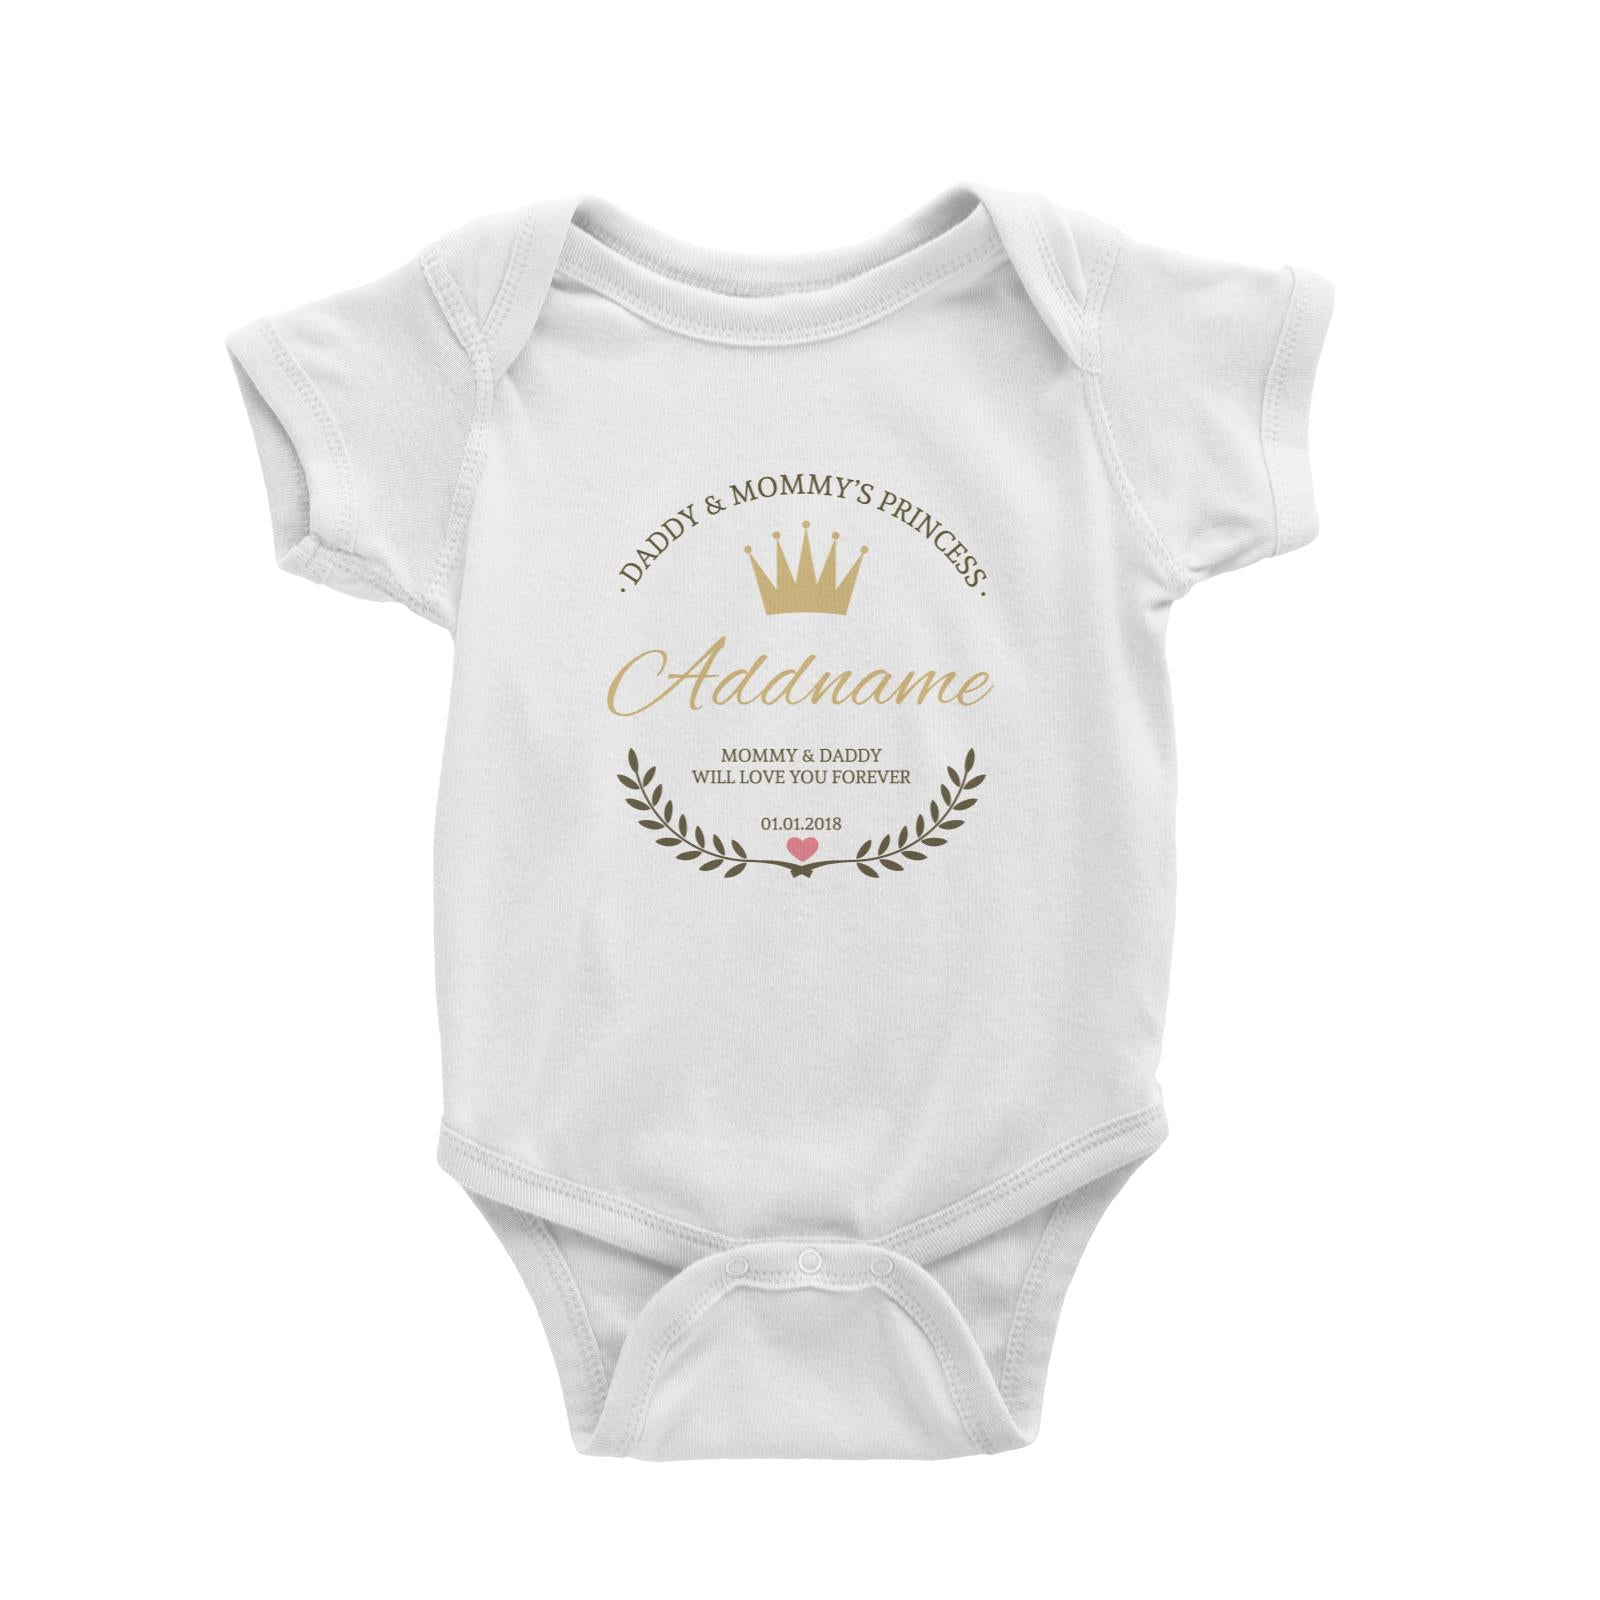 Daddy and Mommy's Princess with Tiara Wreath Personazliable with Name Text and Date Baby Romper